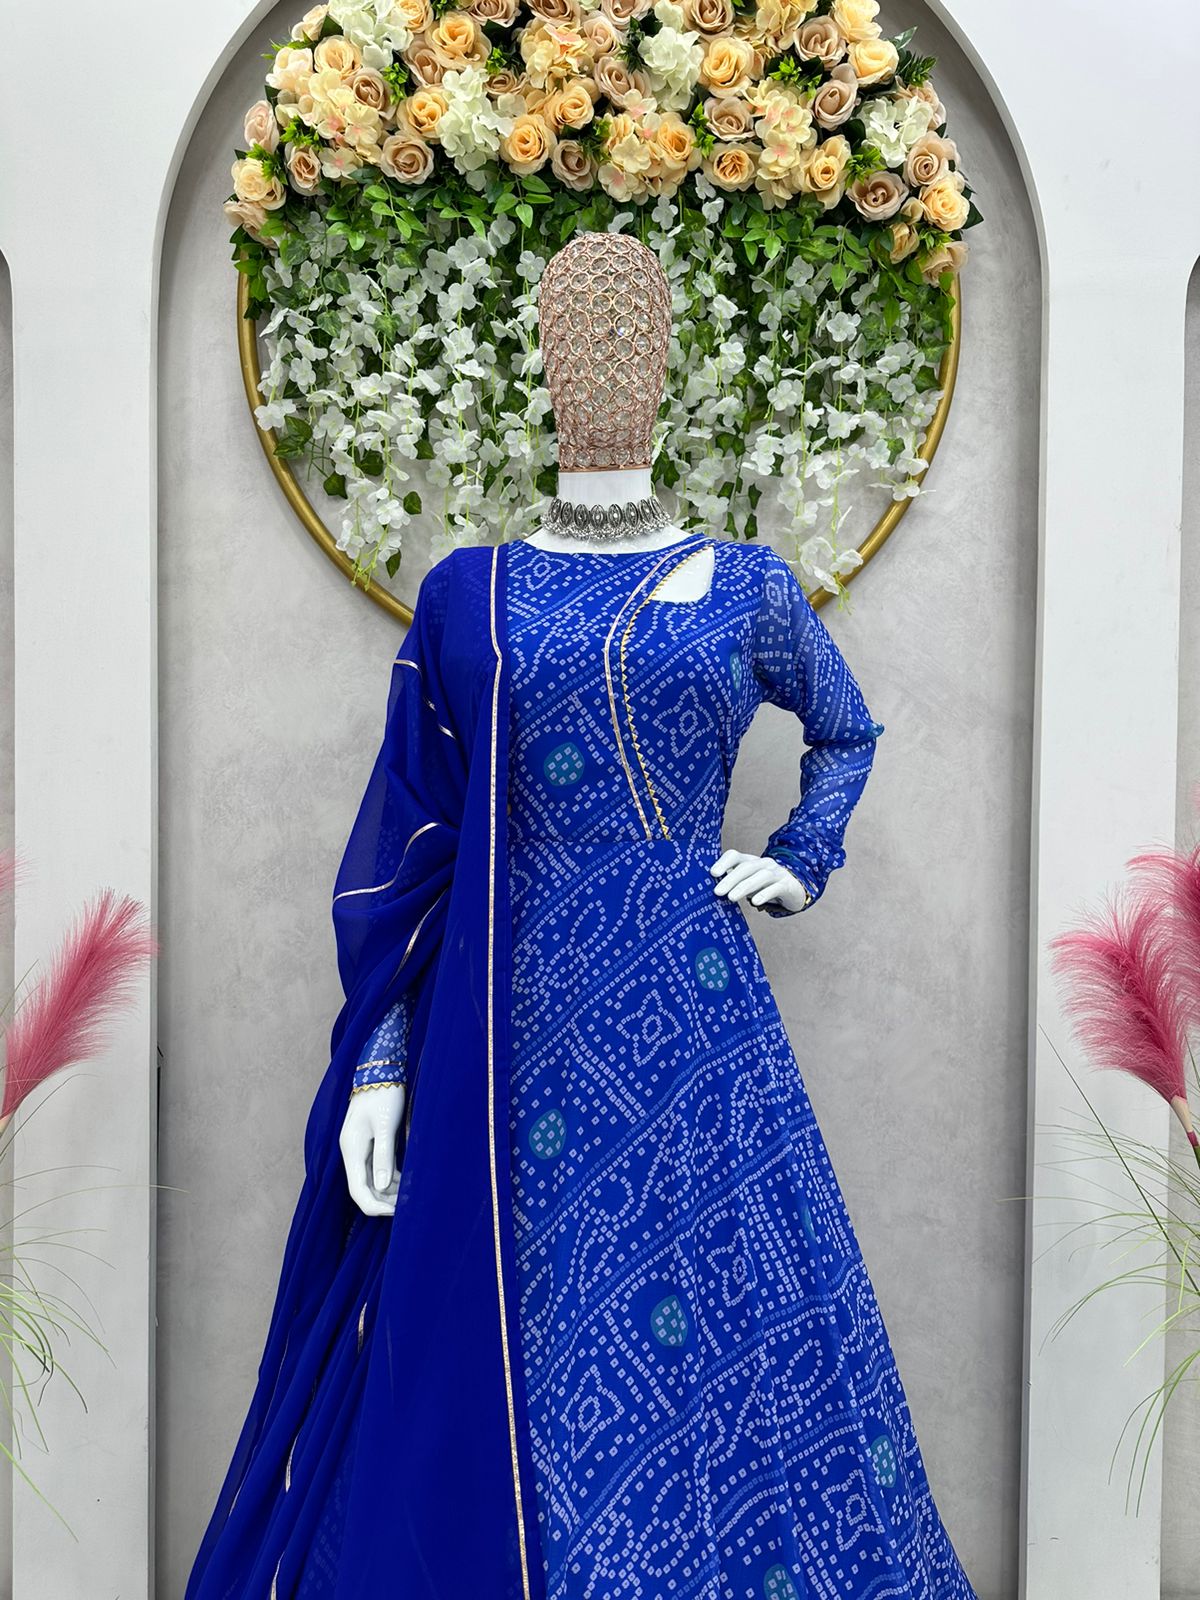 Buy Blue Party Wear Dresses online in India